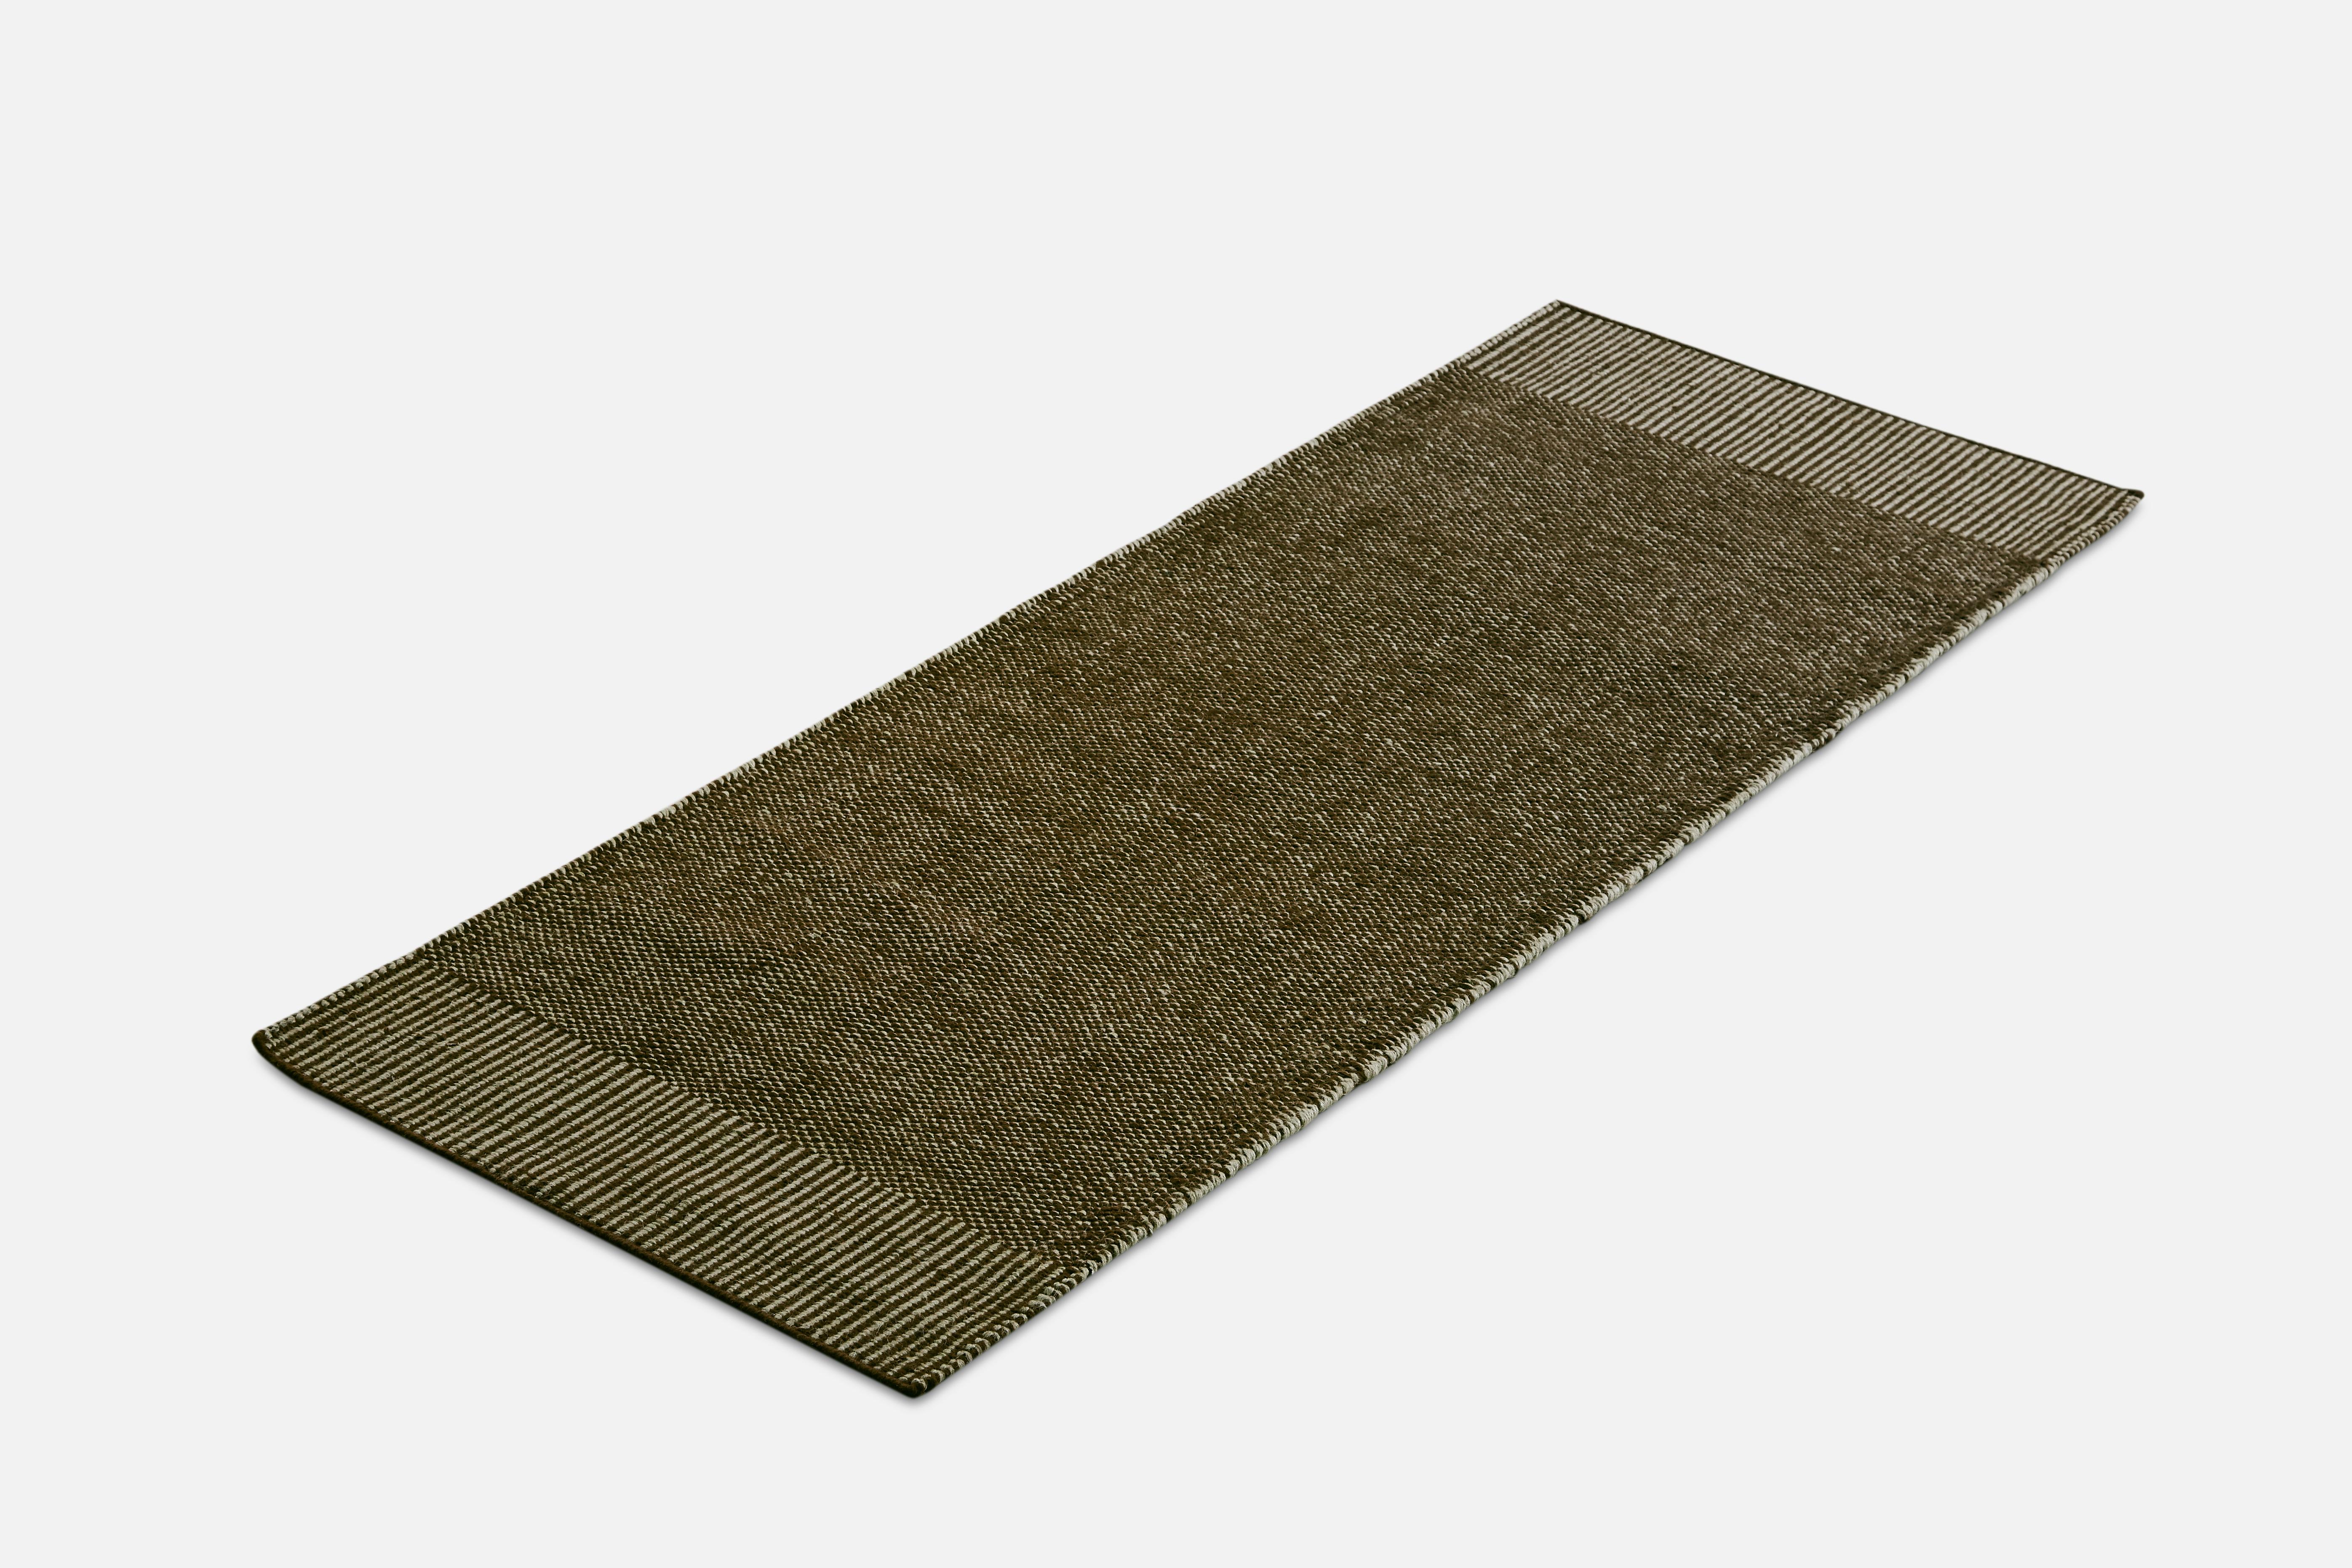 Green Rombo runner rug by Studio MLR.
Materials: 65% wool, 35% jute.
Dimensions: W 75 x L 200 cm
Available in 3 sizes: W 90 x L 140, W 170 x L 240, W 75 x L 200 cm.
Available in grey, moss green and rust.

Rombo is characterised by the